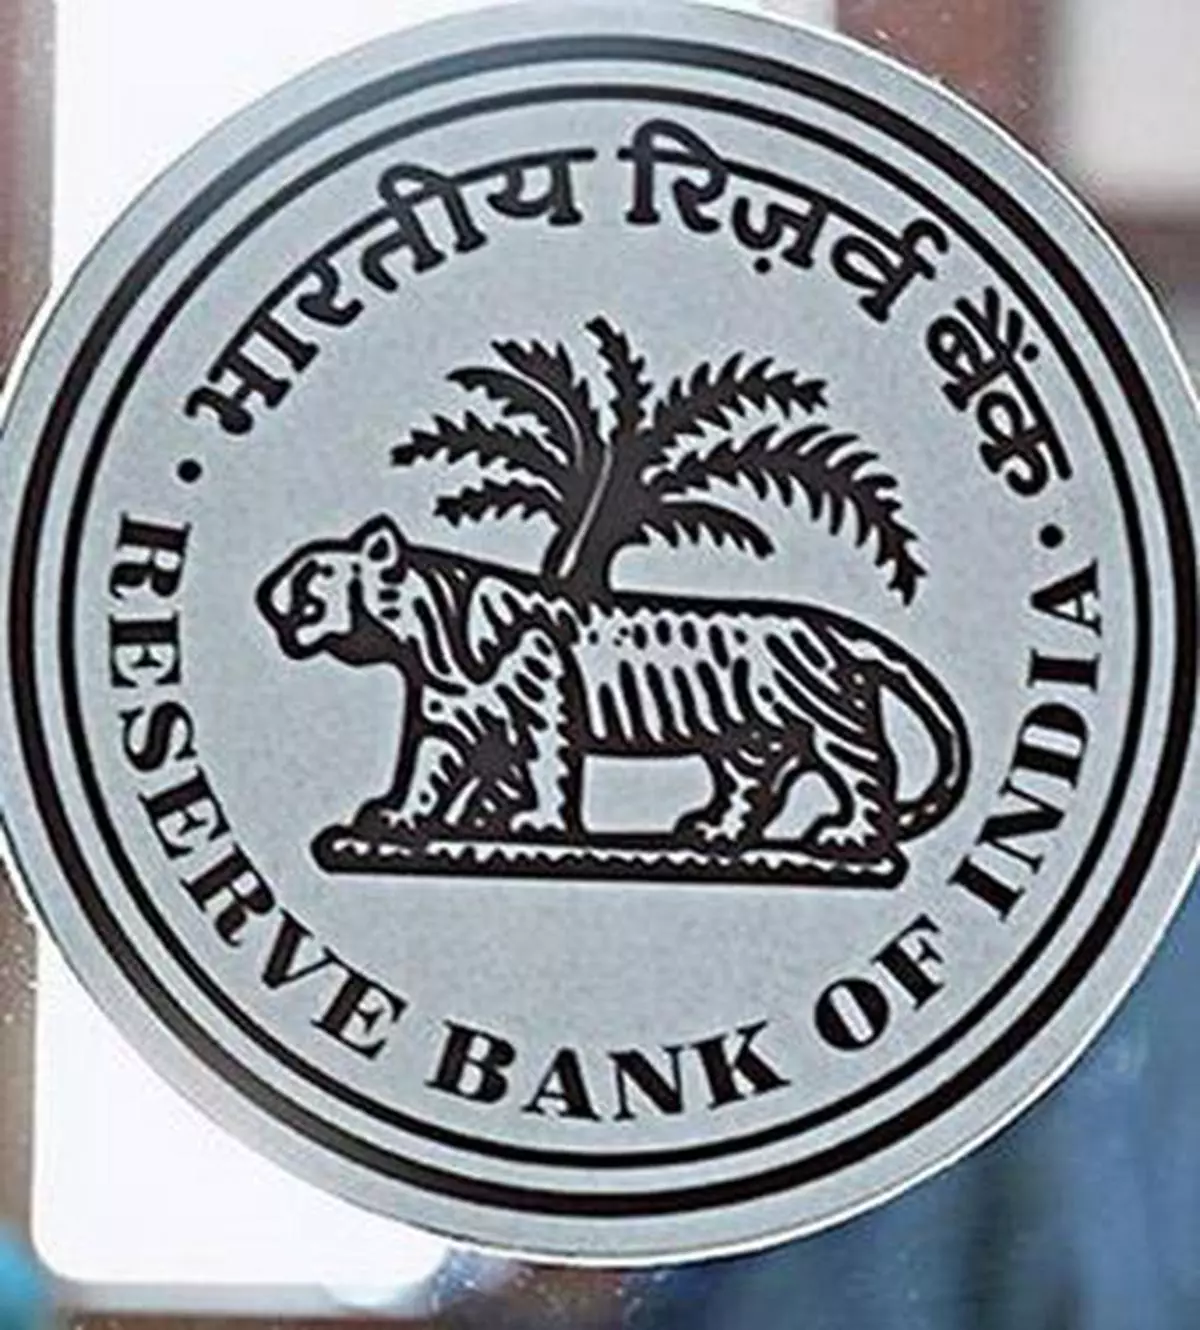 New measures to tame inflation unlikely to divert RBI from its monetary  tightening: Barclays - The Hindu BusinessLine